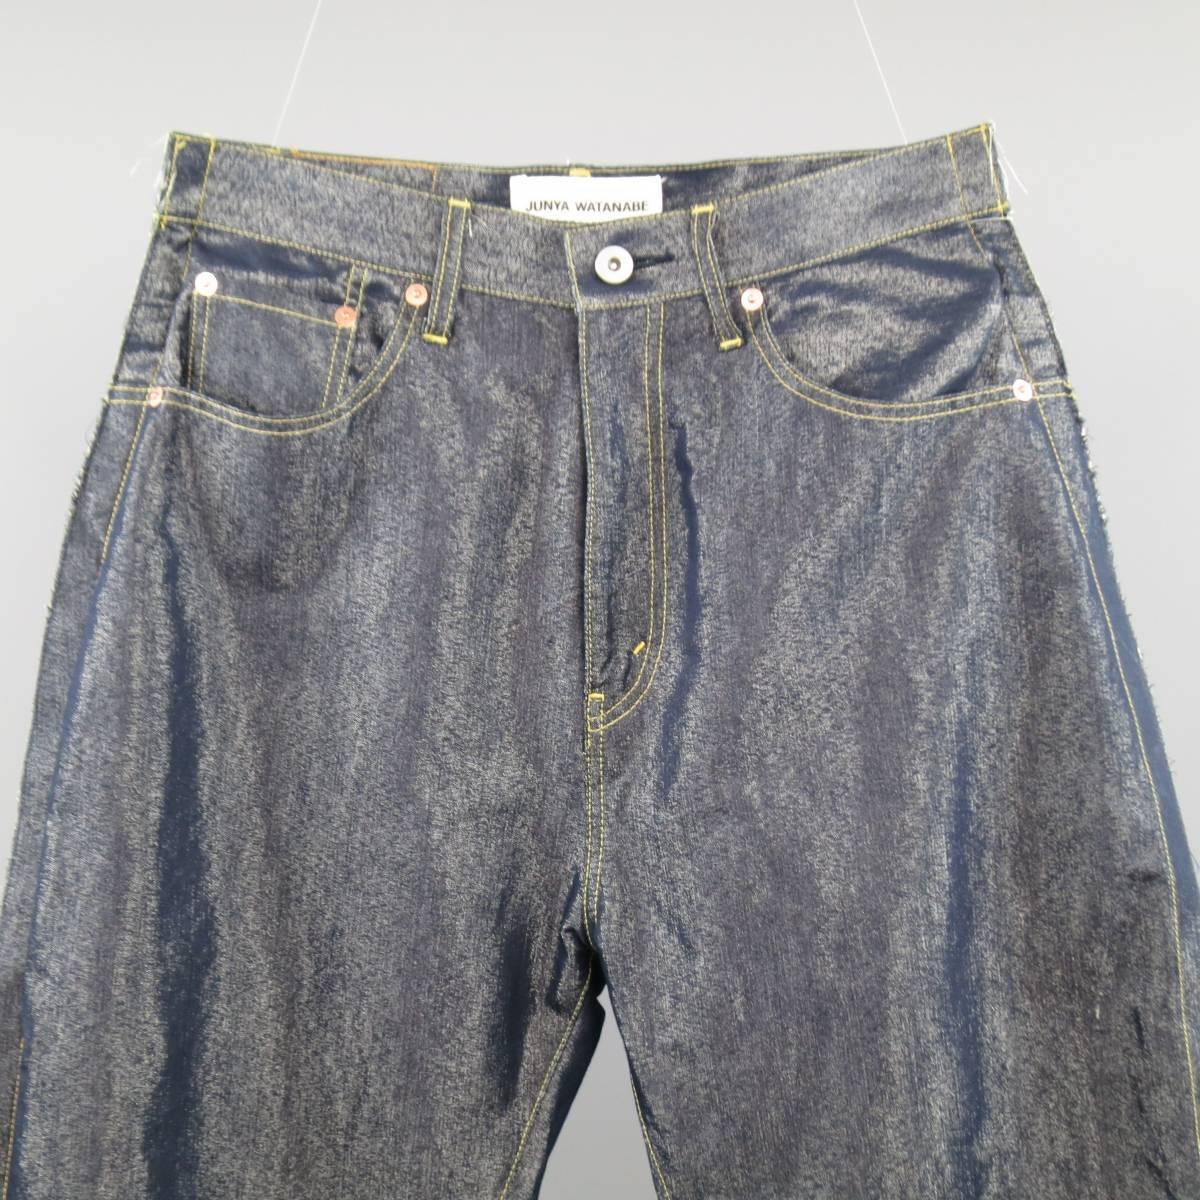 JUNYA WATANABE COMMES des GARCONS DENIM brand jeans come in a metallic sparkle foil blend denim and features a classic high rise denim cut and features a frayed hem and reverse side seam. Made in Japan.
 
Excellent Pre-Owned Condition.
Marked:
